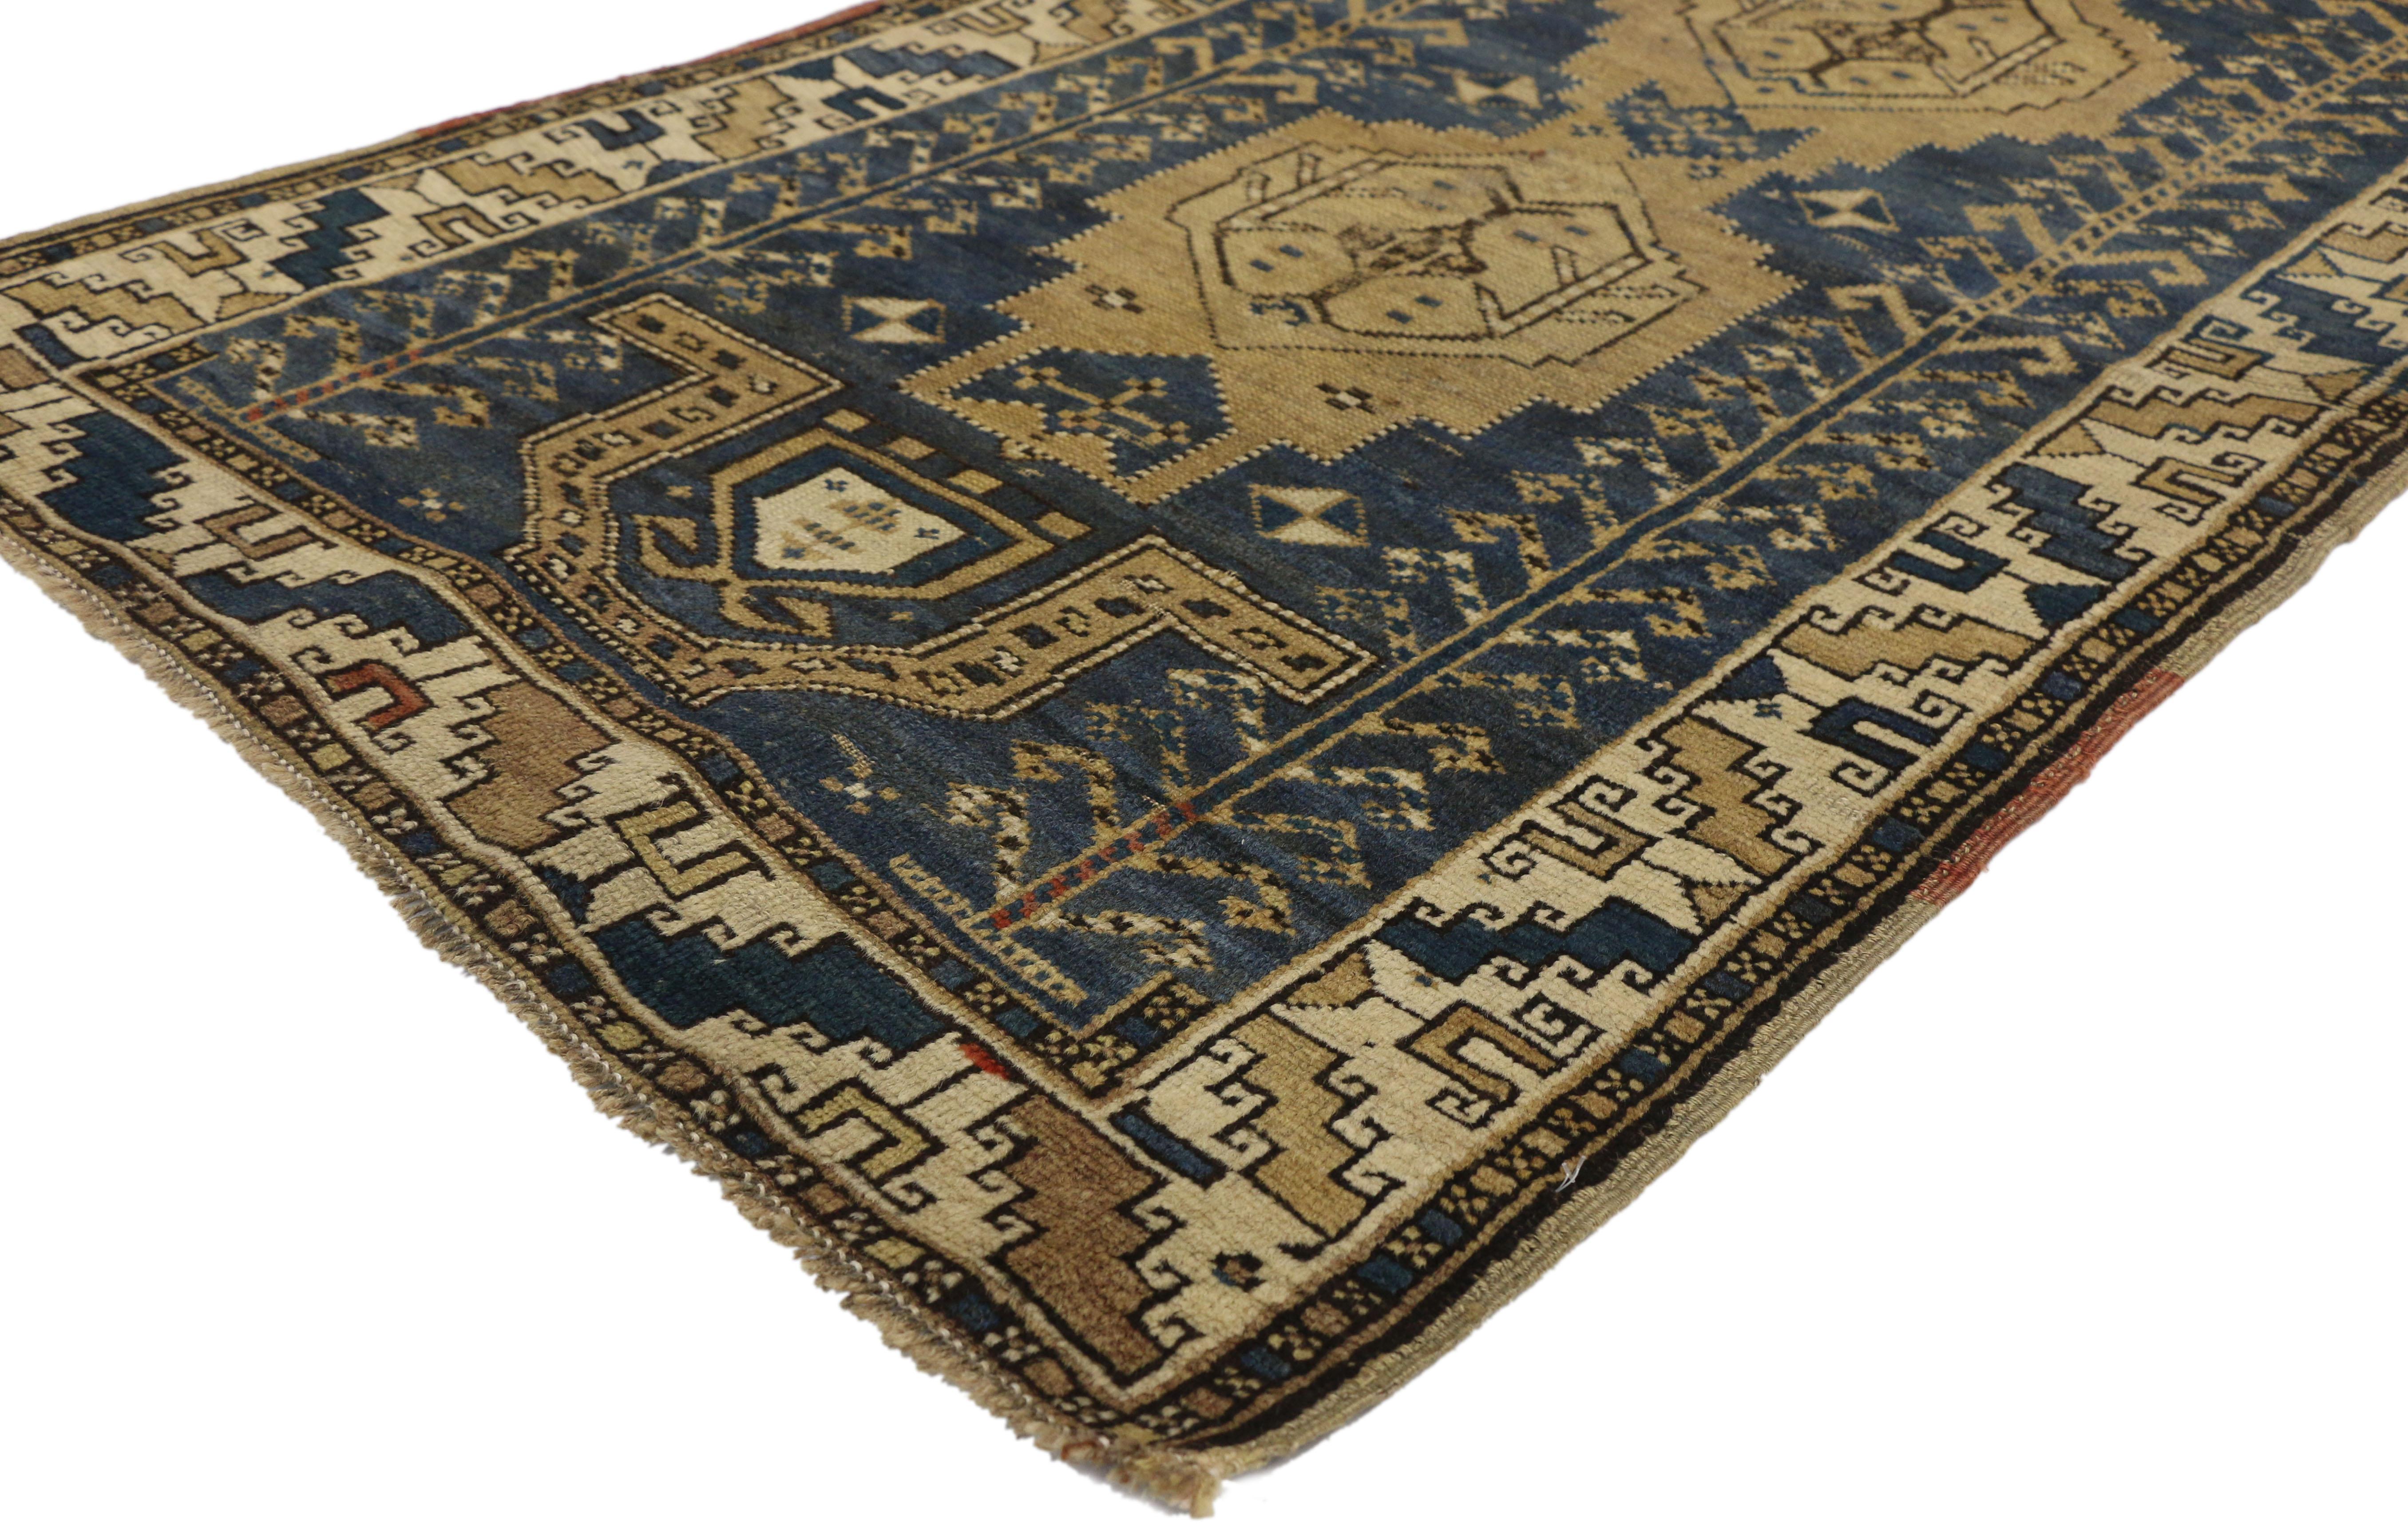 74162 Antique Caucasian Kazak rug with Artisan Tribal style. This hand knotted wool antique Caucasian Kazak rug with artisan tribal style features two medallions with a mihrab niche at either end and flanked by a vertical ram's horn pole column on